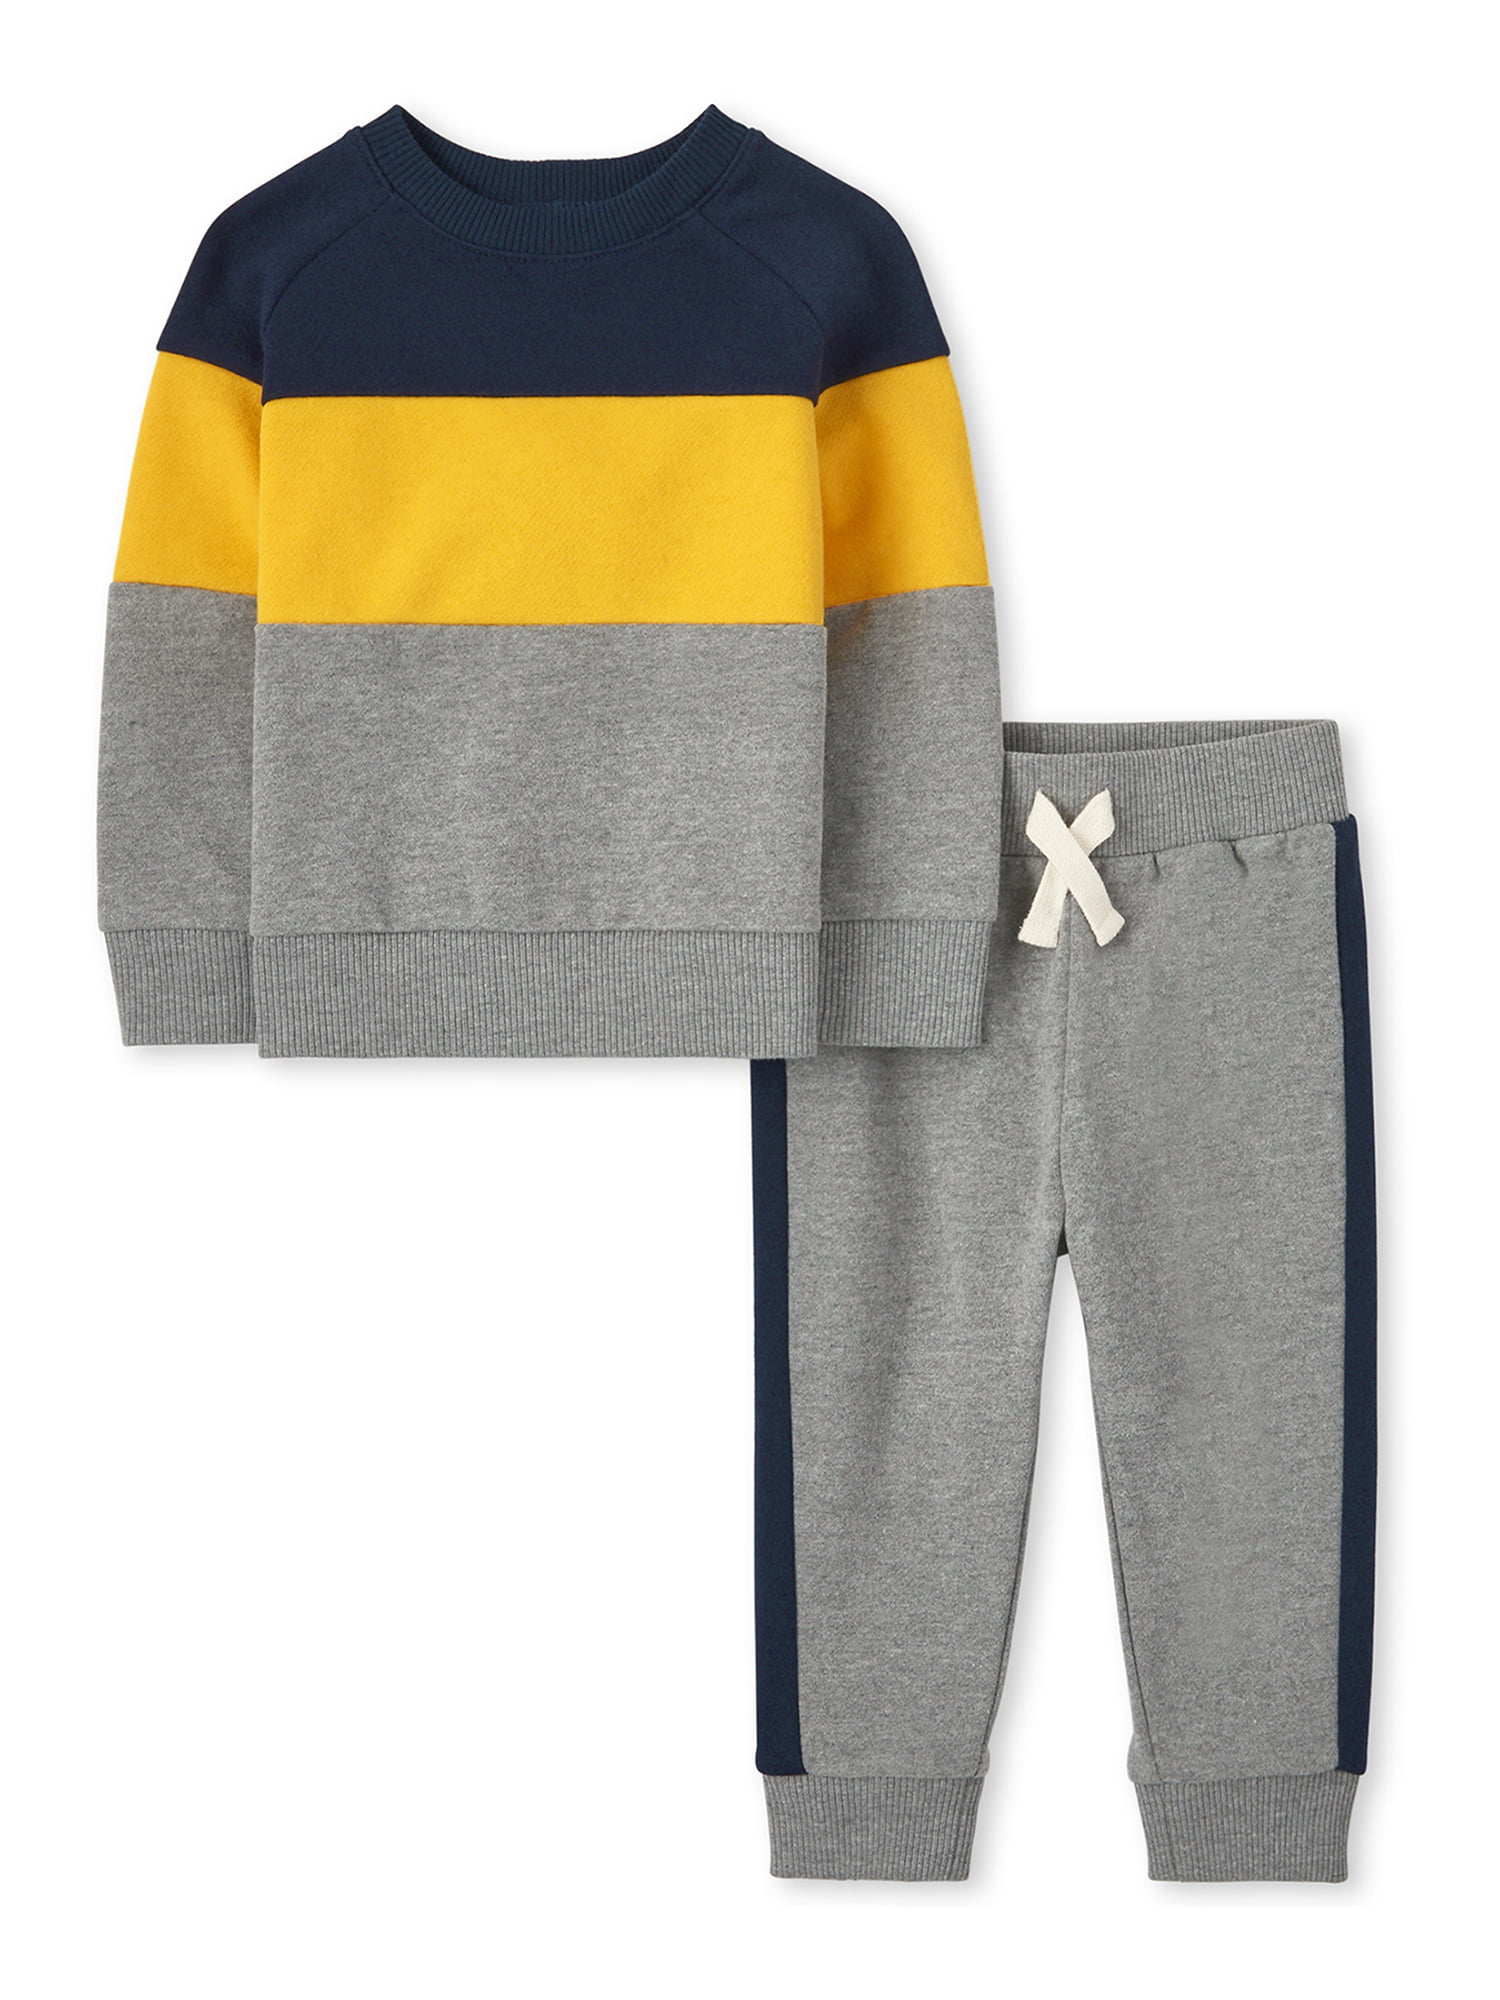 The Childrens Place Boys Colorblock Sweater 